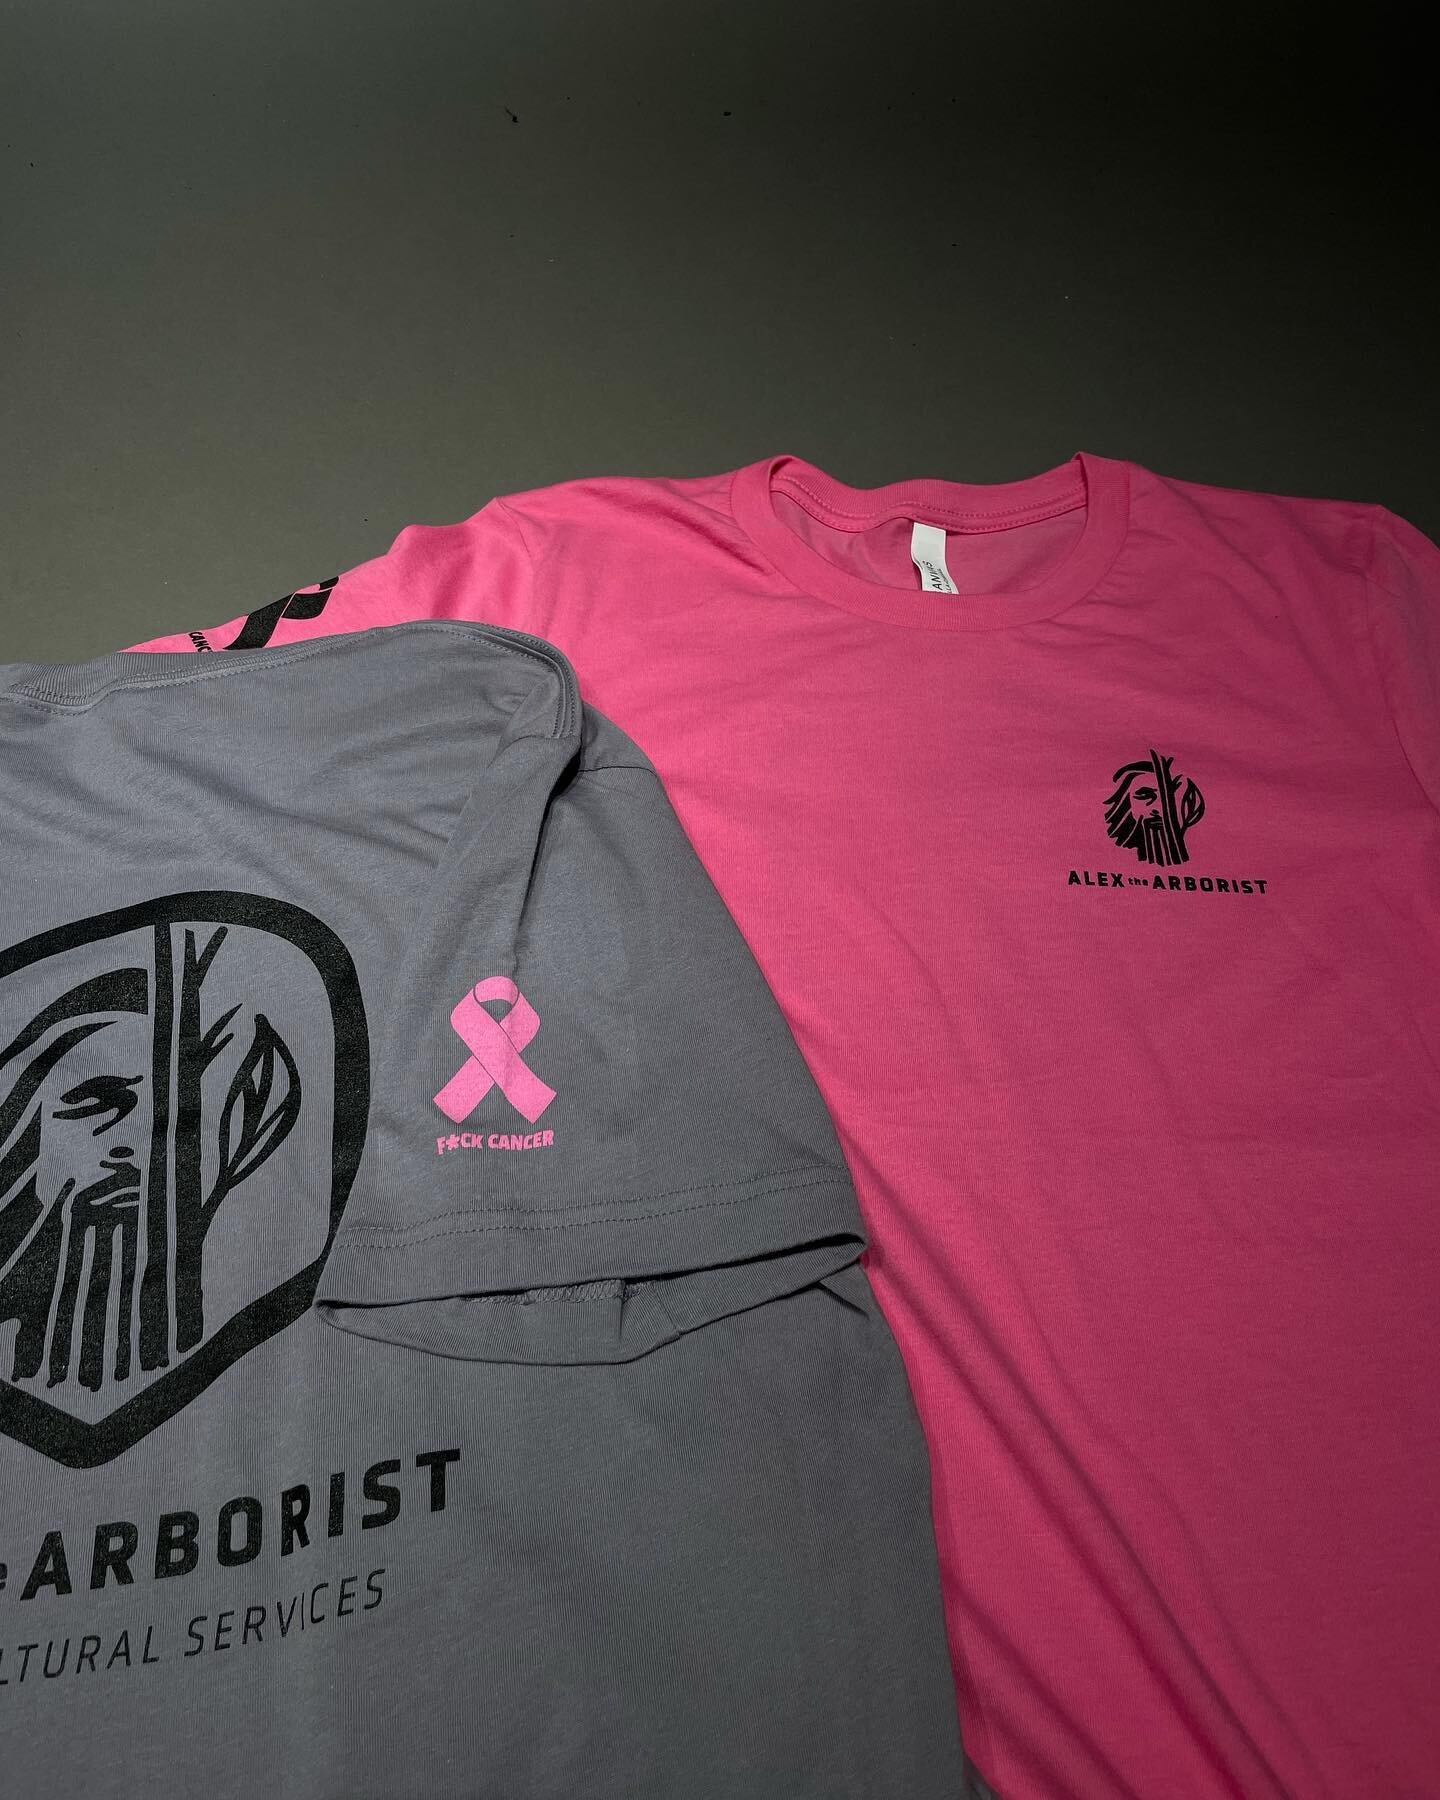 You know you&rsquo;re in good company when your friend / client and a hell of a tree faller to boot @alex_the_arborist wants to get down on breast cancer awareness month. #breastcancerawarenessmonth #breastcancerawareness